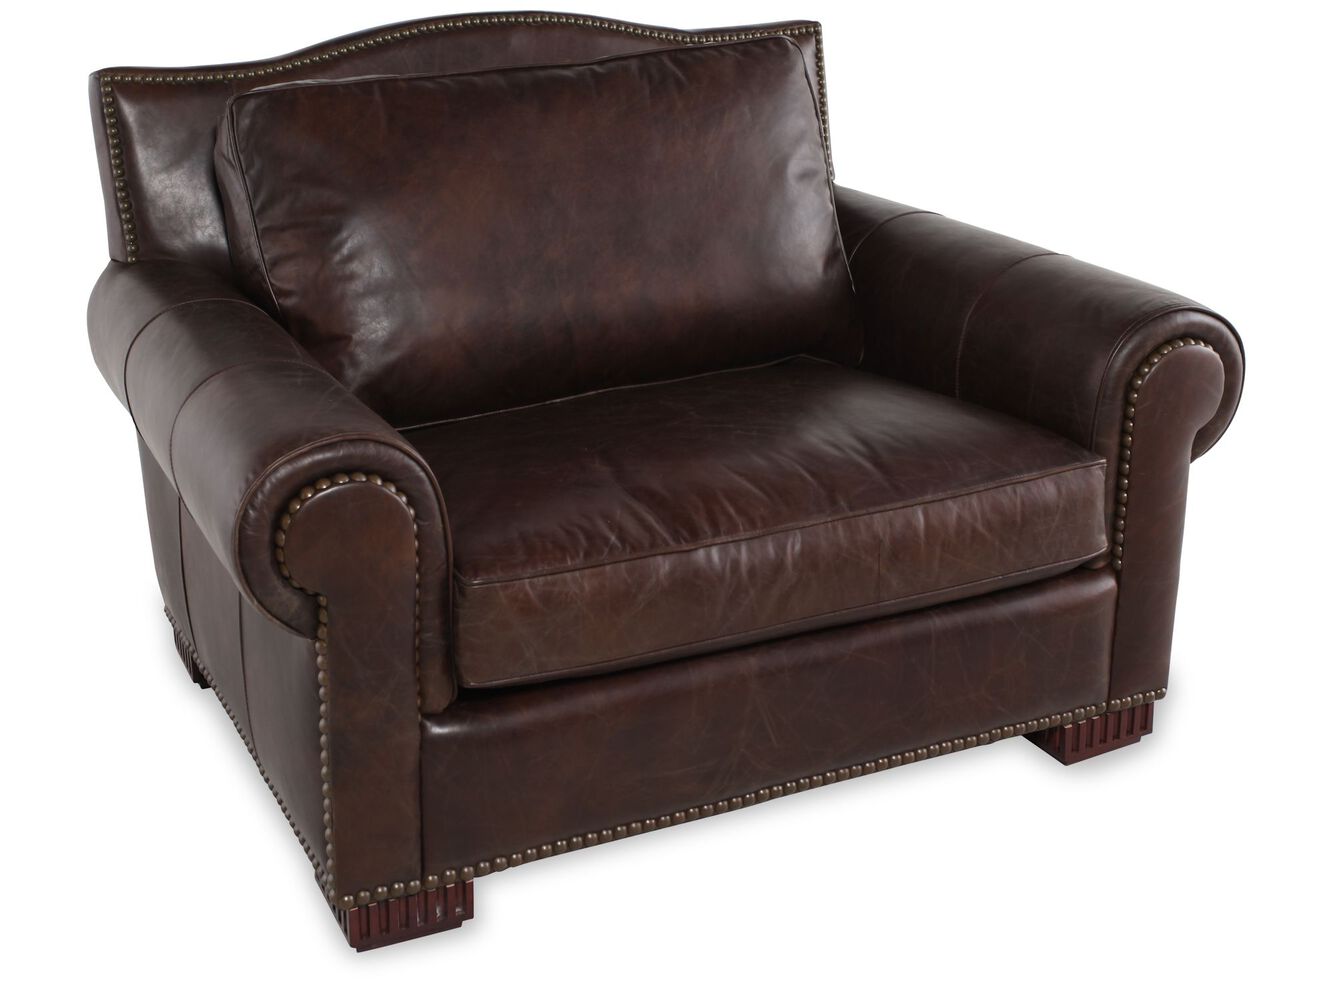 NailheadTrimmed Leather Chair and a Half in Dark Brown